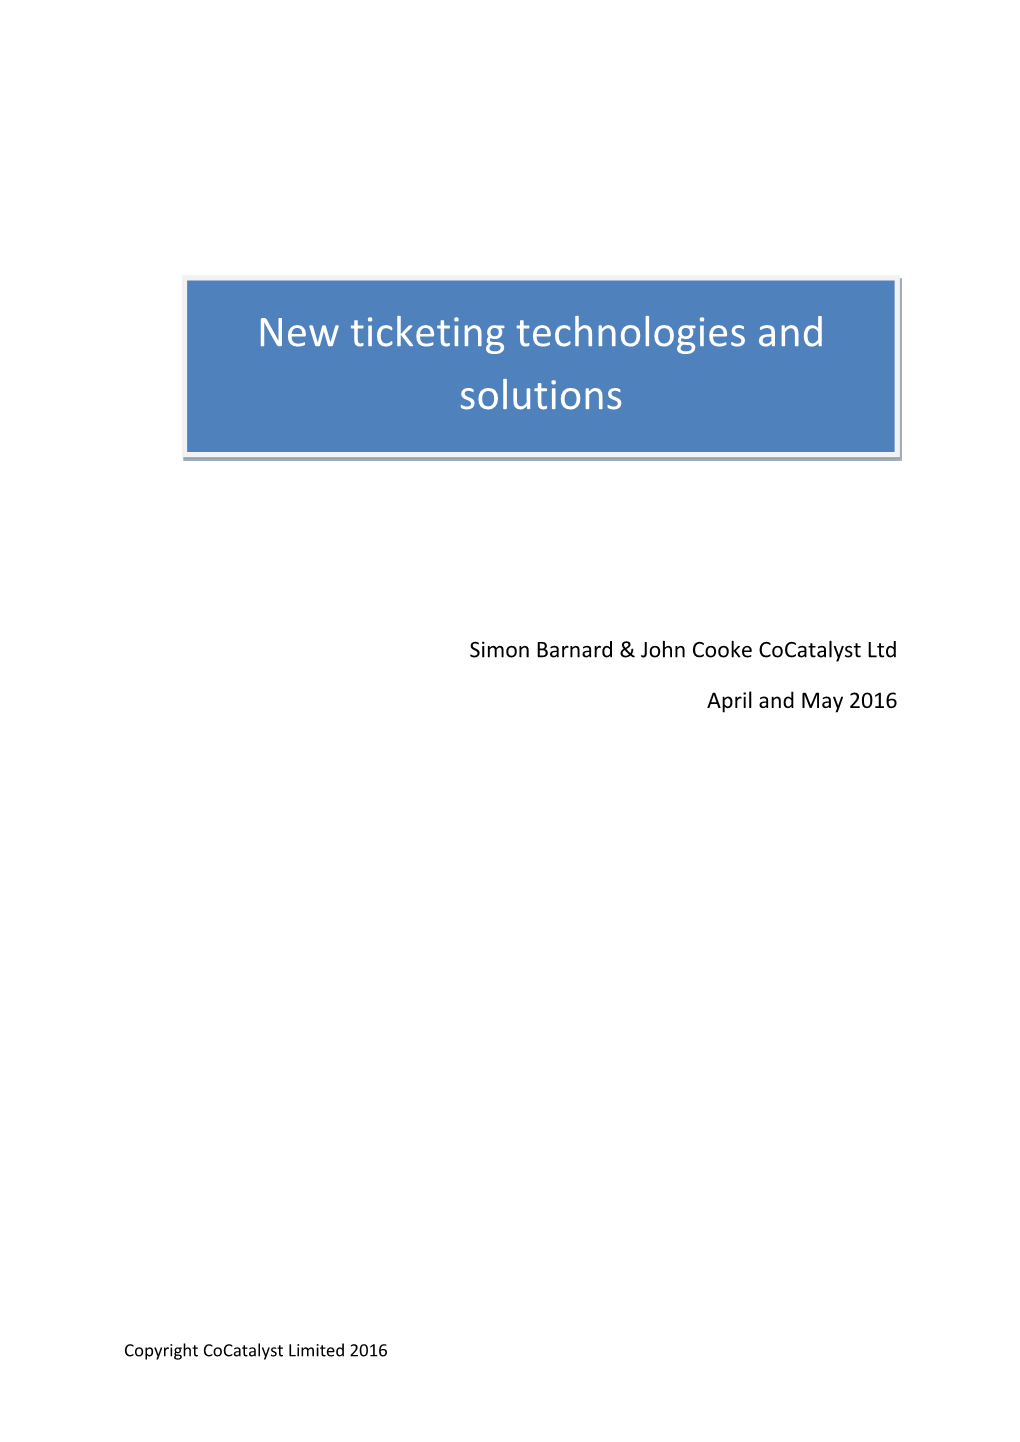 New Ticketing Technologies and Solutions